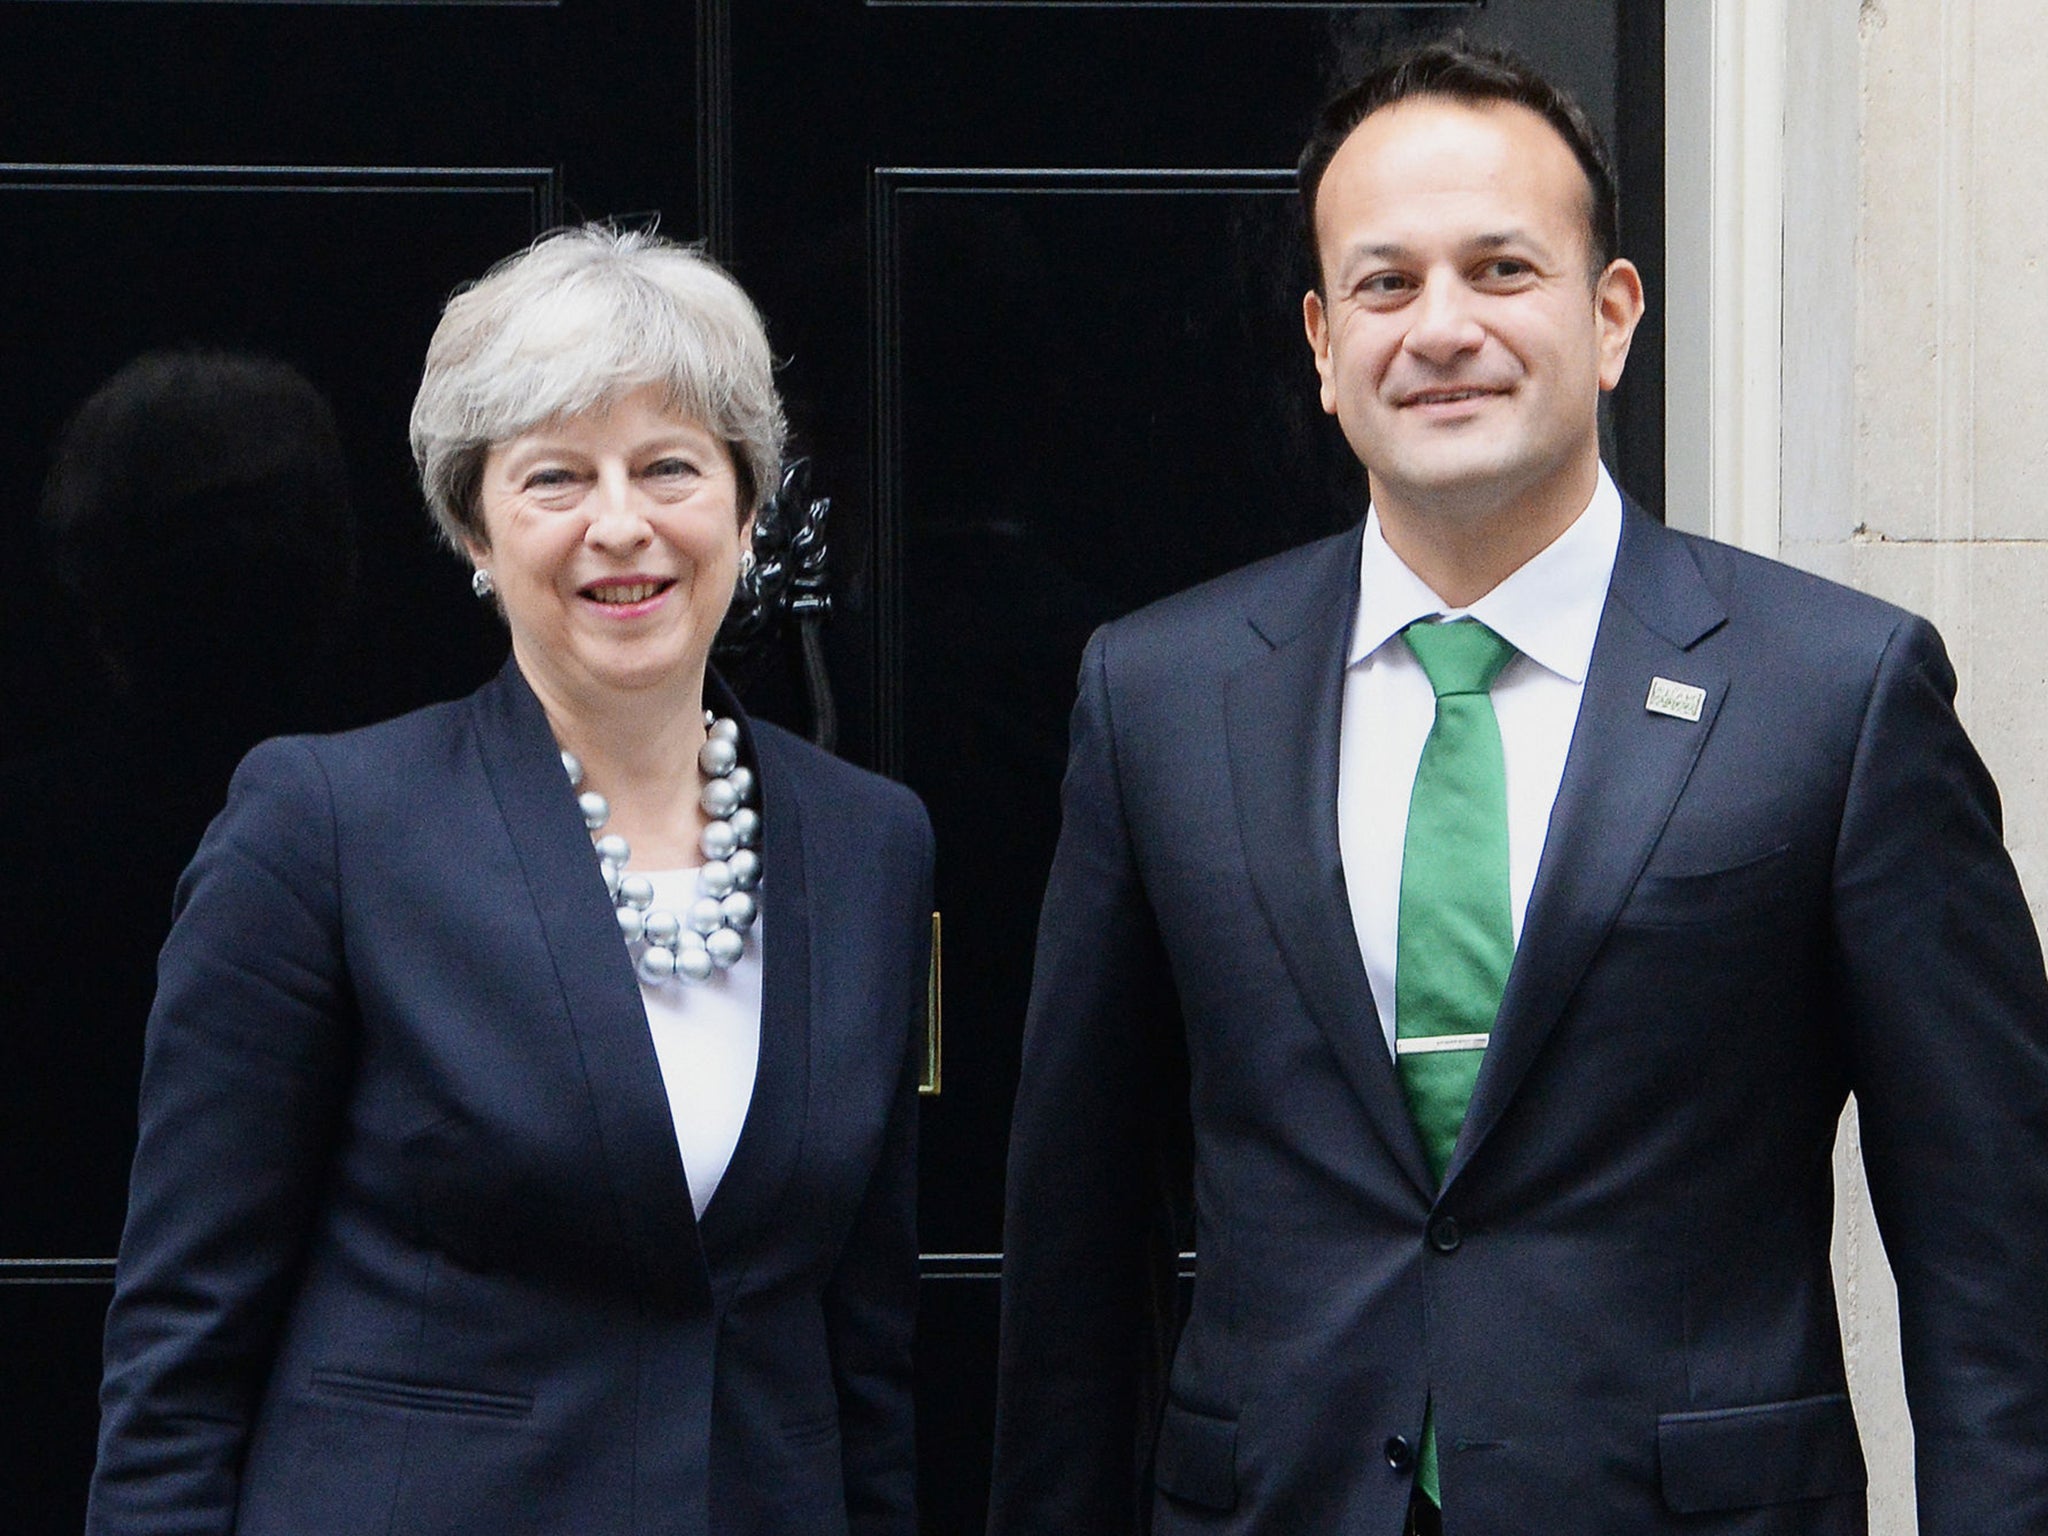 'We both want to build ever deeper bilateral relations and to help secure the restoration of powersharing institutions in Northern Ireland', the Taoiseach said